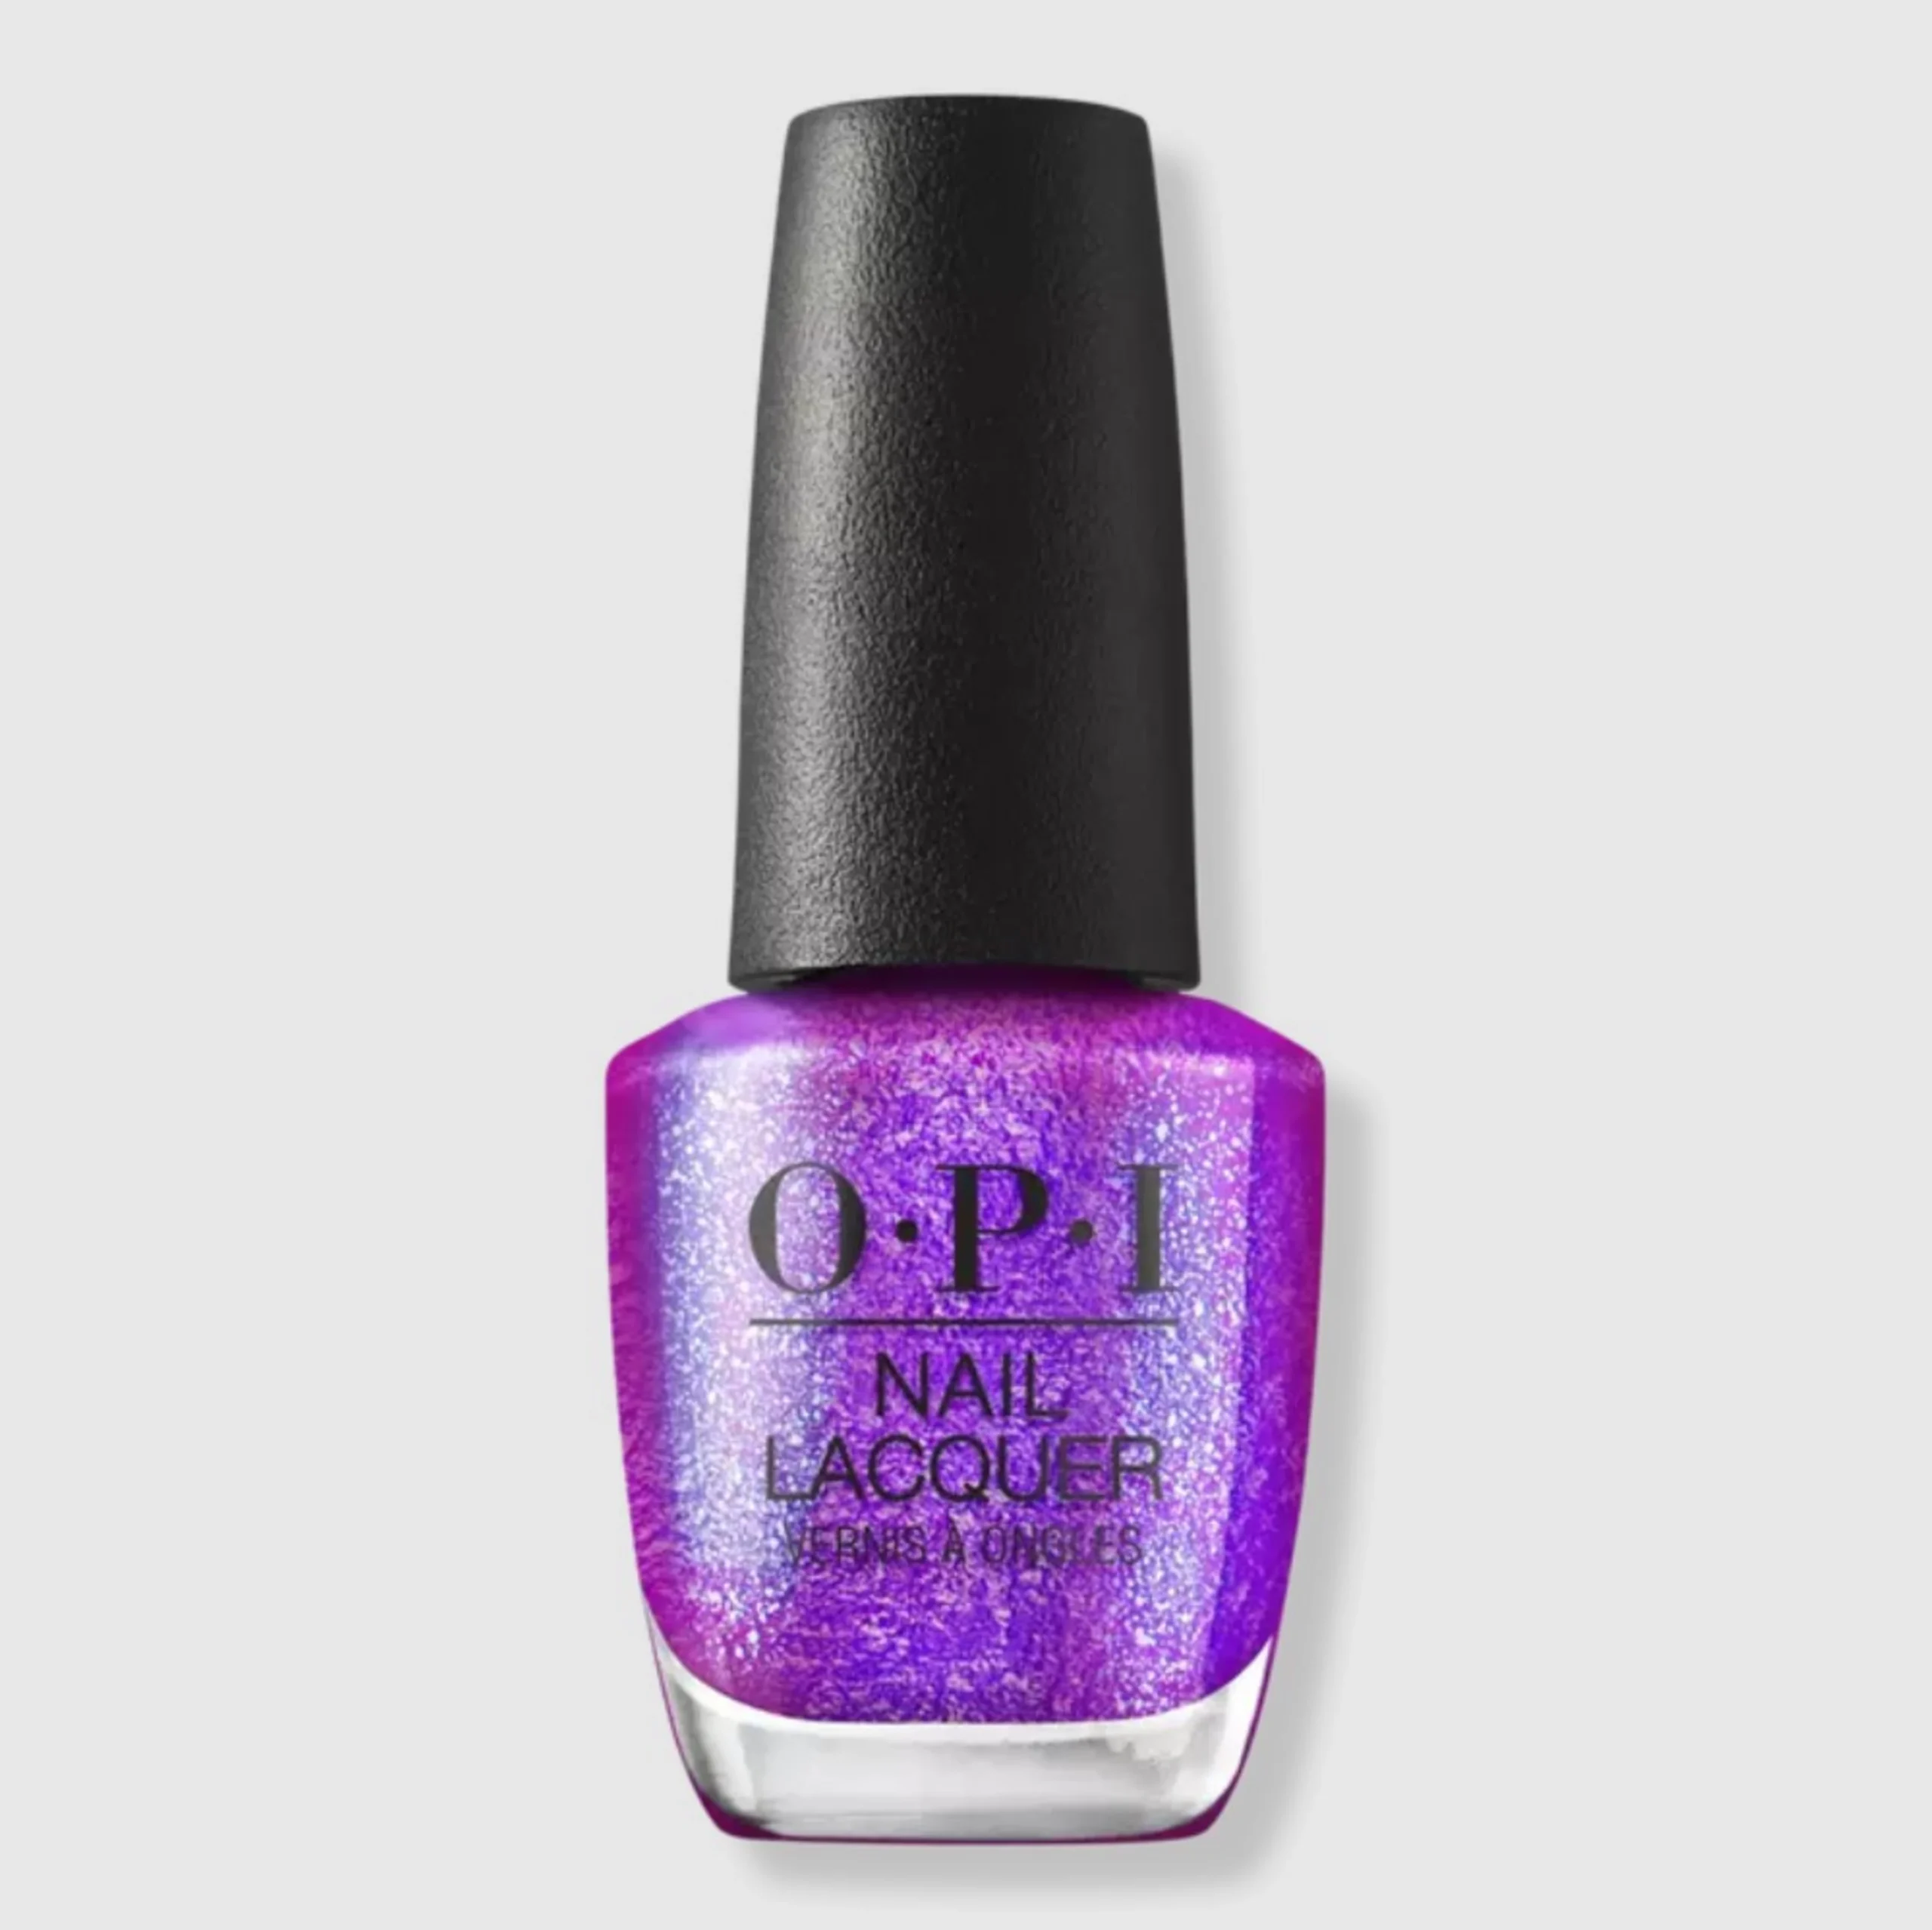 OPI Nail Lacquer in Feelin- Libra-ted